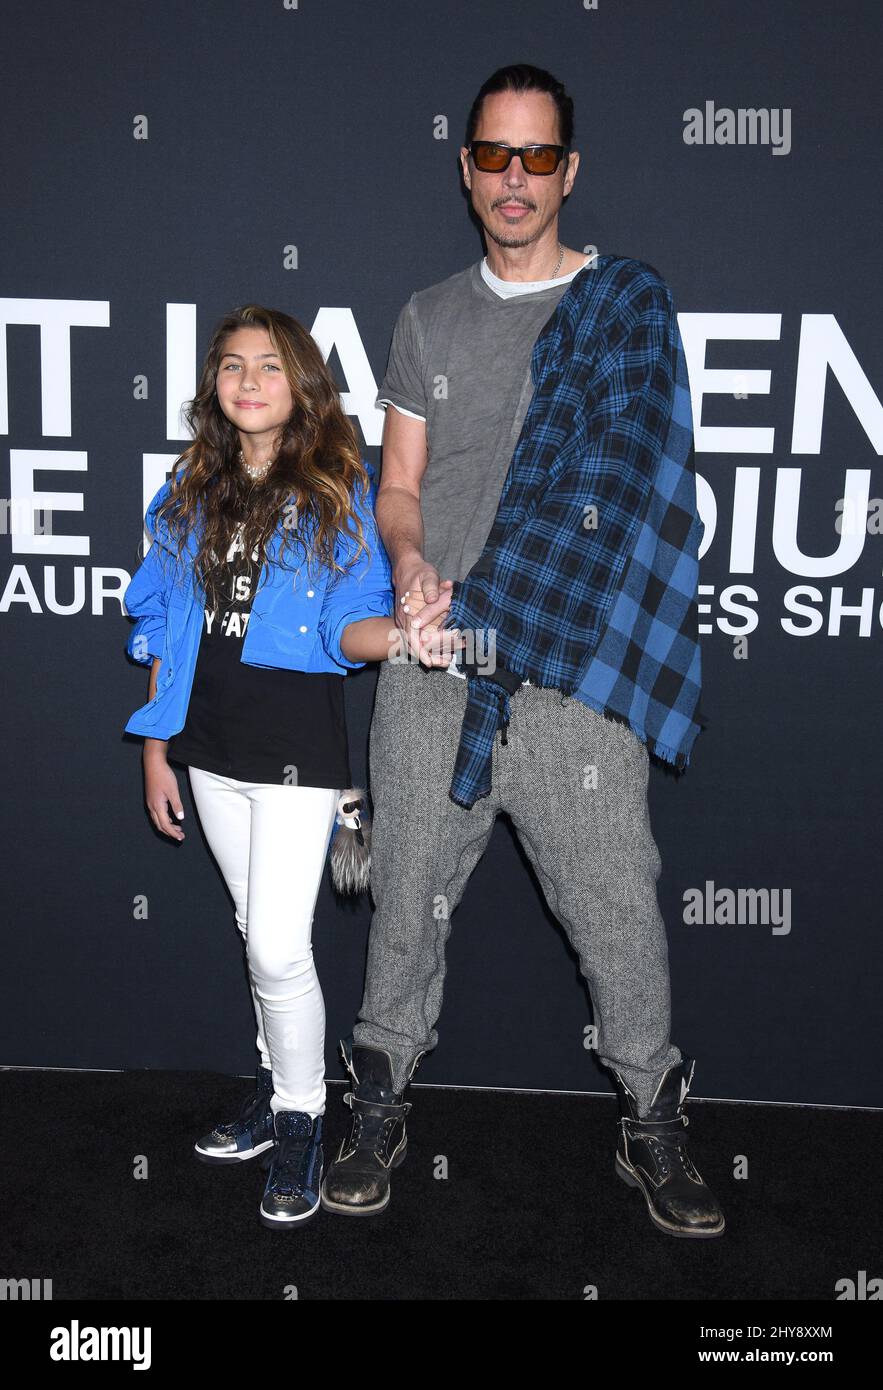 Chris Cornell and Toni Cornell attending the Saint Laurent event held at the Hollywood Palladium in Los Angeles, California. Stock Photo